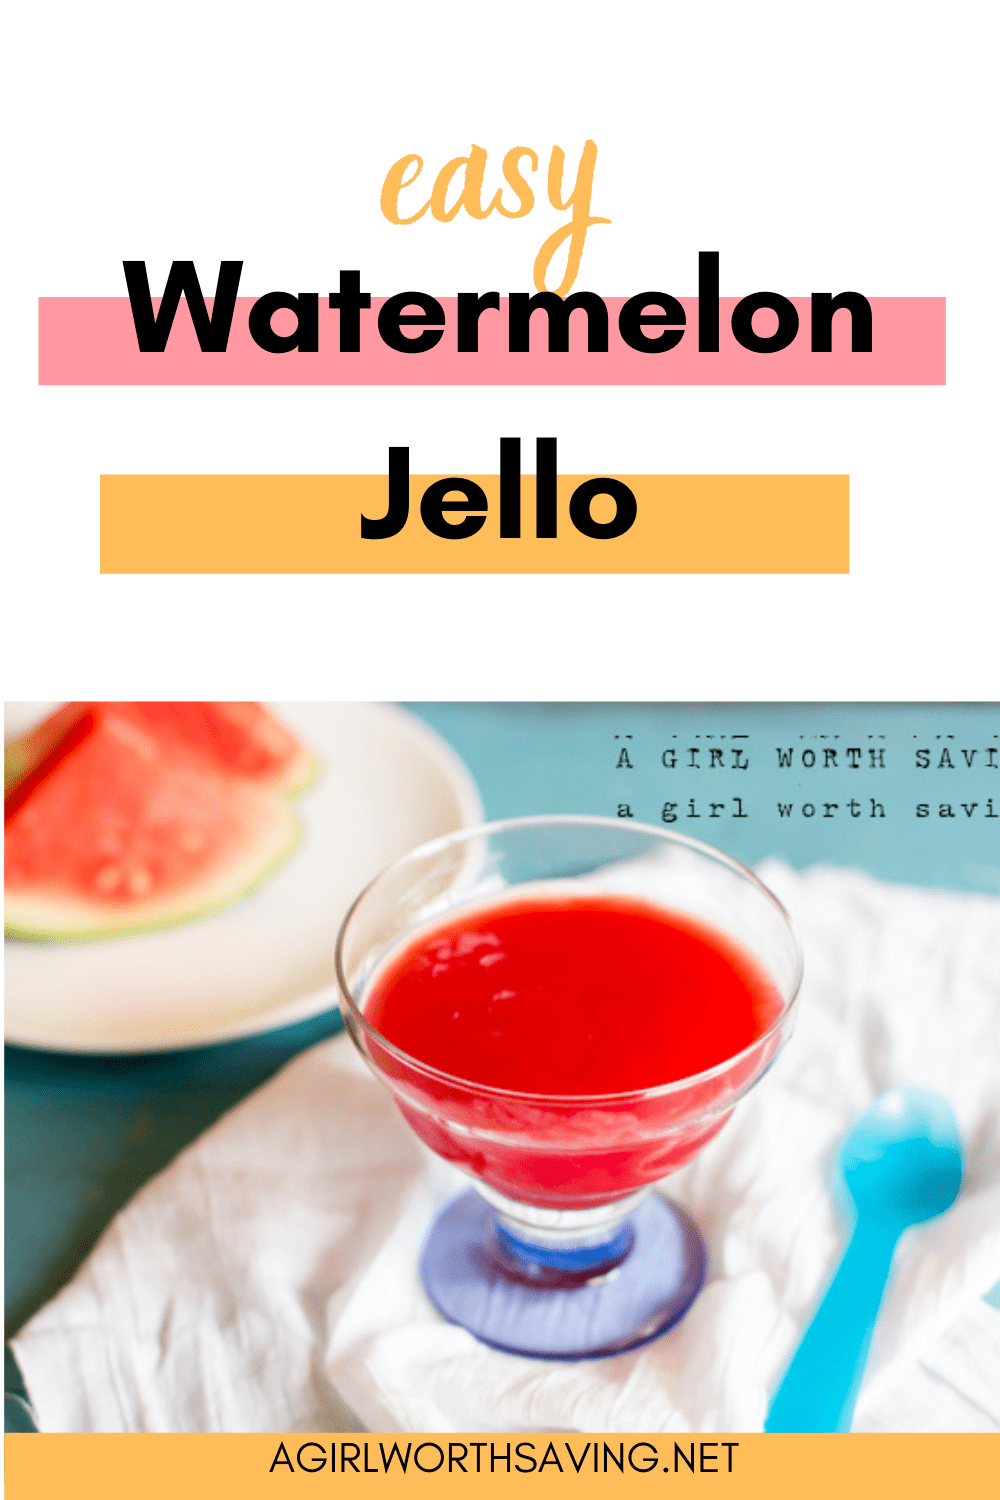 There is nothing like a sweet slice of watermelon on a hot summer day. Take some of that fresh fruit and make this super simple Watermelon jello recipe